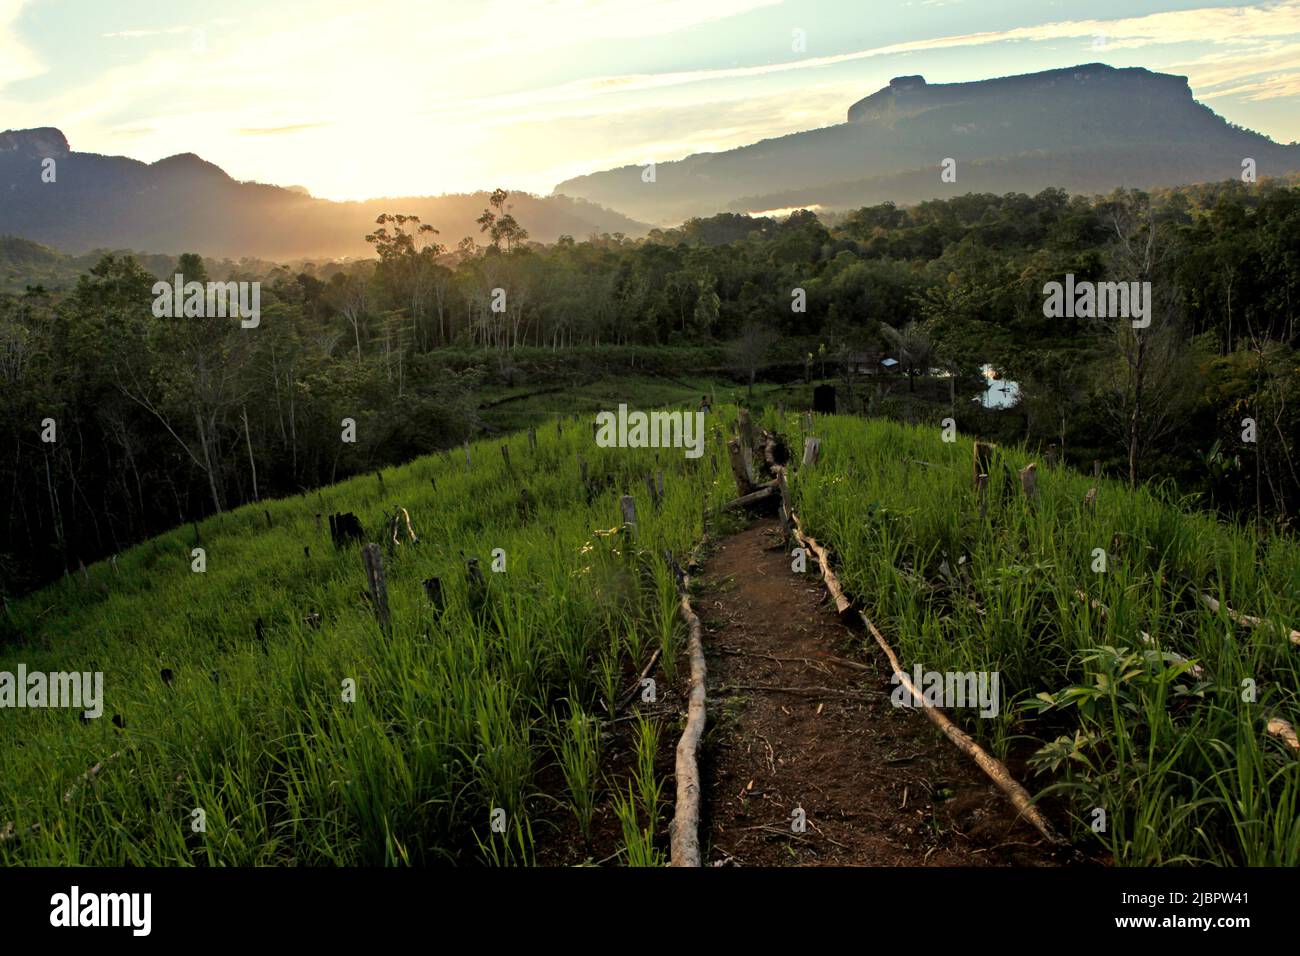 Agricultural field in a background of forest and hills in Nanga Raun village, Kalis, Kapuas Hulu, West Kalimantan, Indonesia. Stock Photo